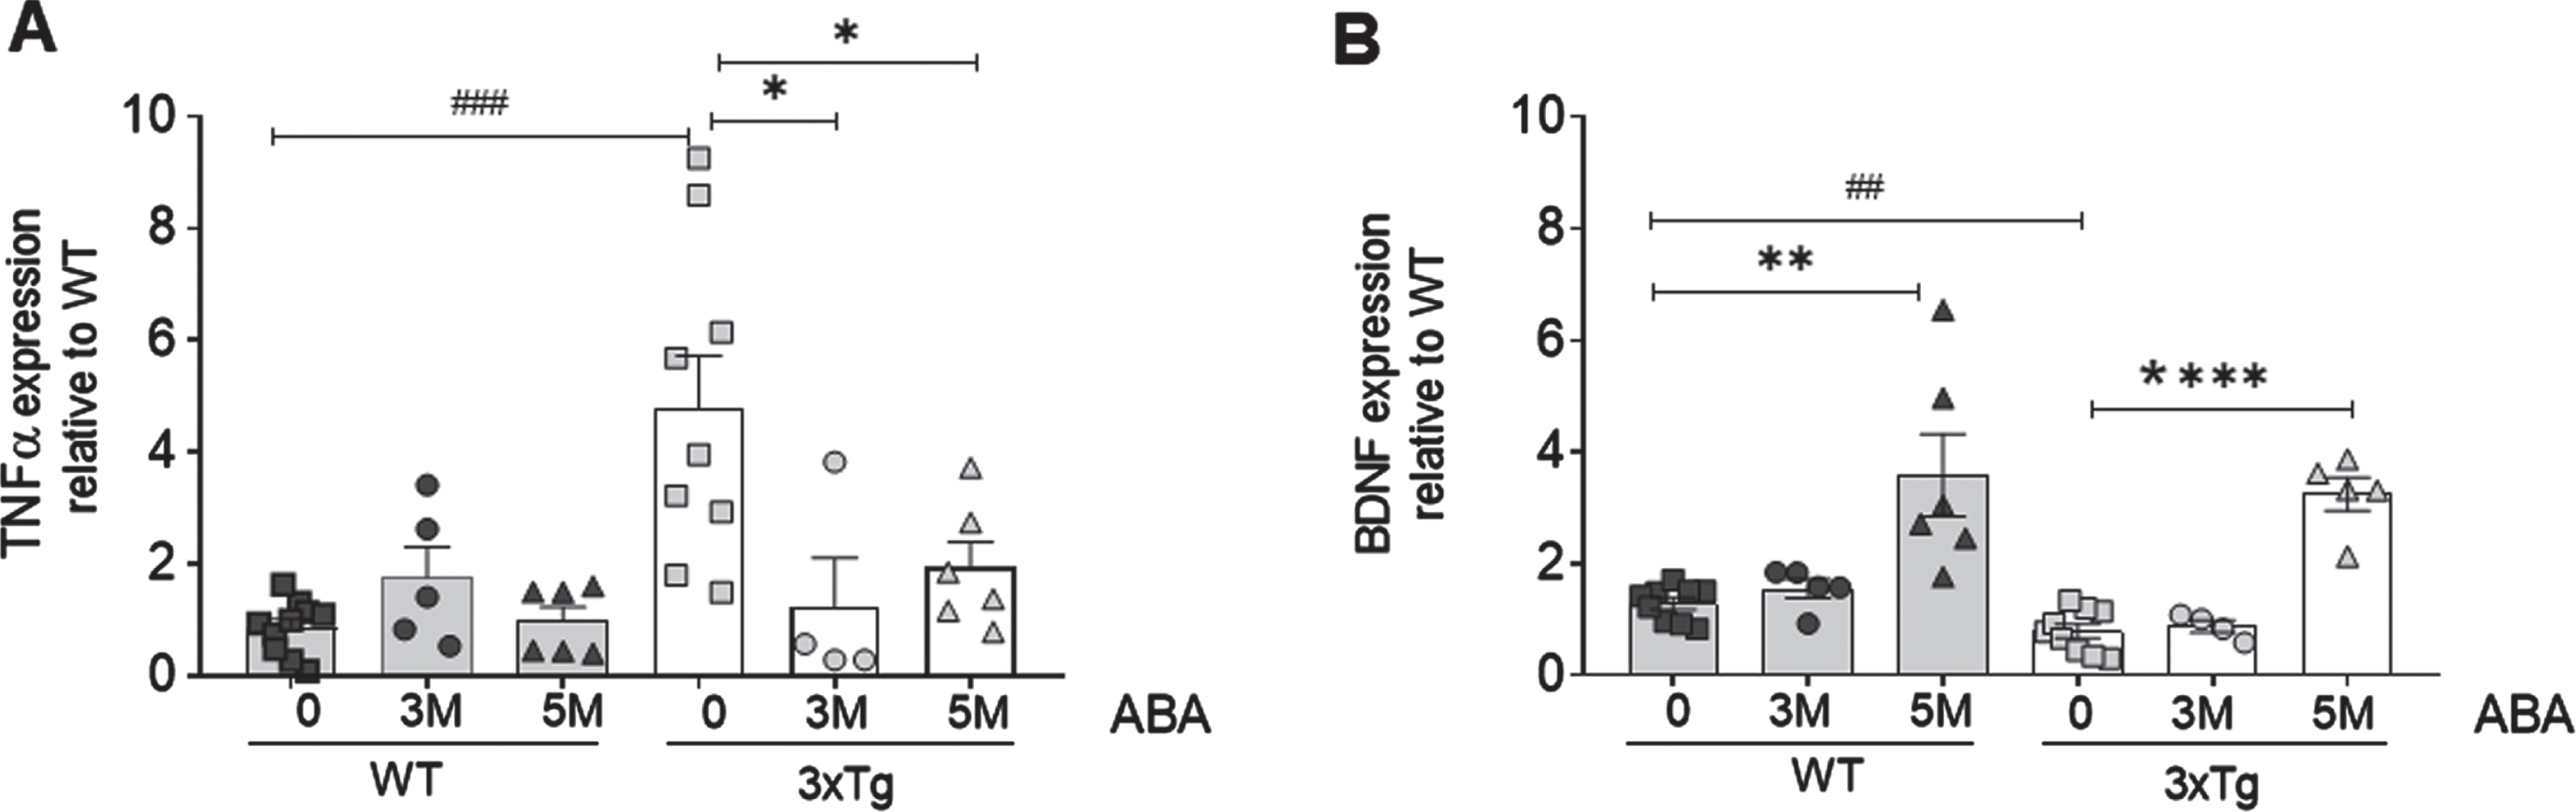 ABA treatment (A) reduces hippocampal TNF and (B) increases BDNF expression as measured by qPCR. Data are represented as the mean±of at least 5–9 independent subjects in triplicate. Data were analyzed by Student t-test (*p < 0.05, **p < 0.01, and ****p < 0.0001 for ABA effect; # #p < 0.01 and # # #p < 0.001 for genotype effect).